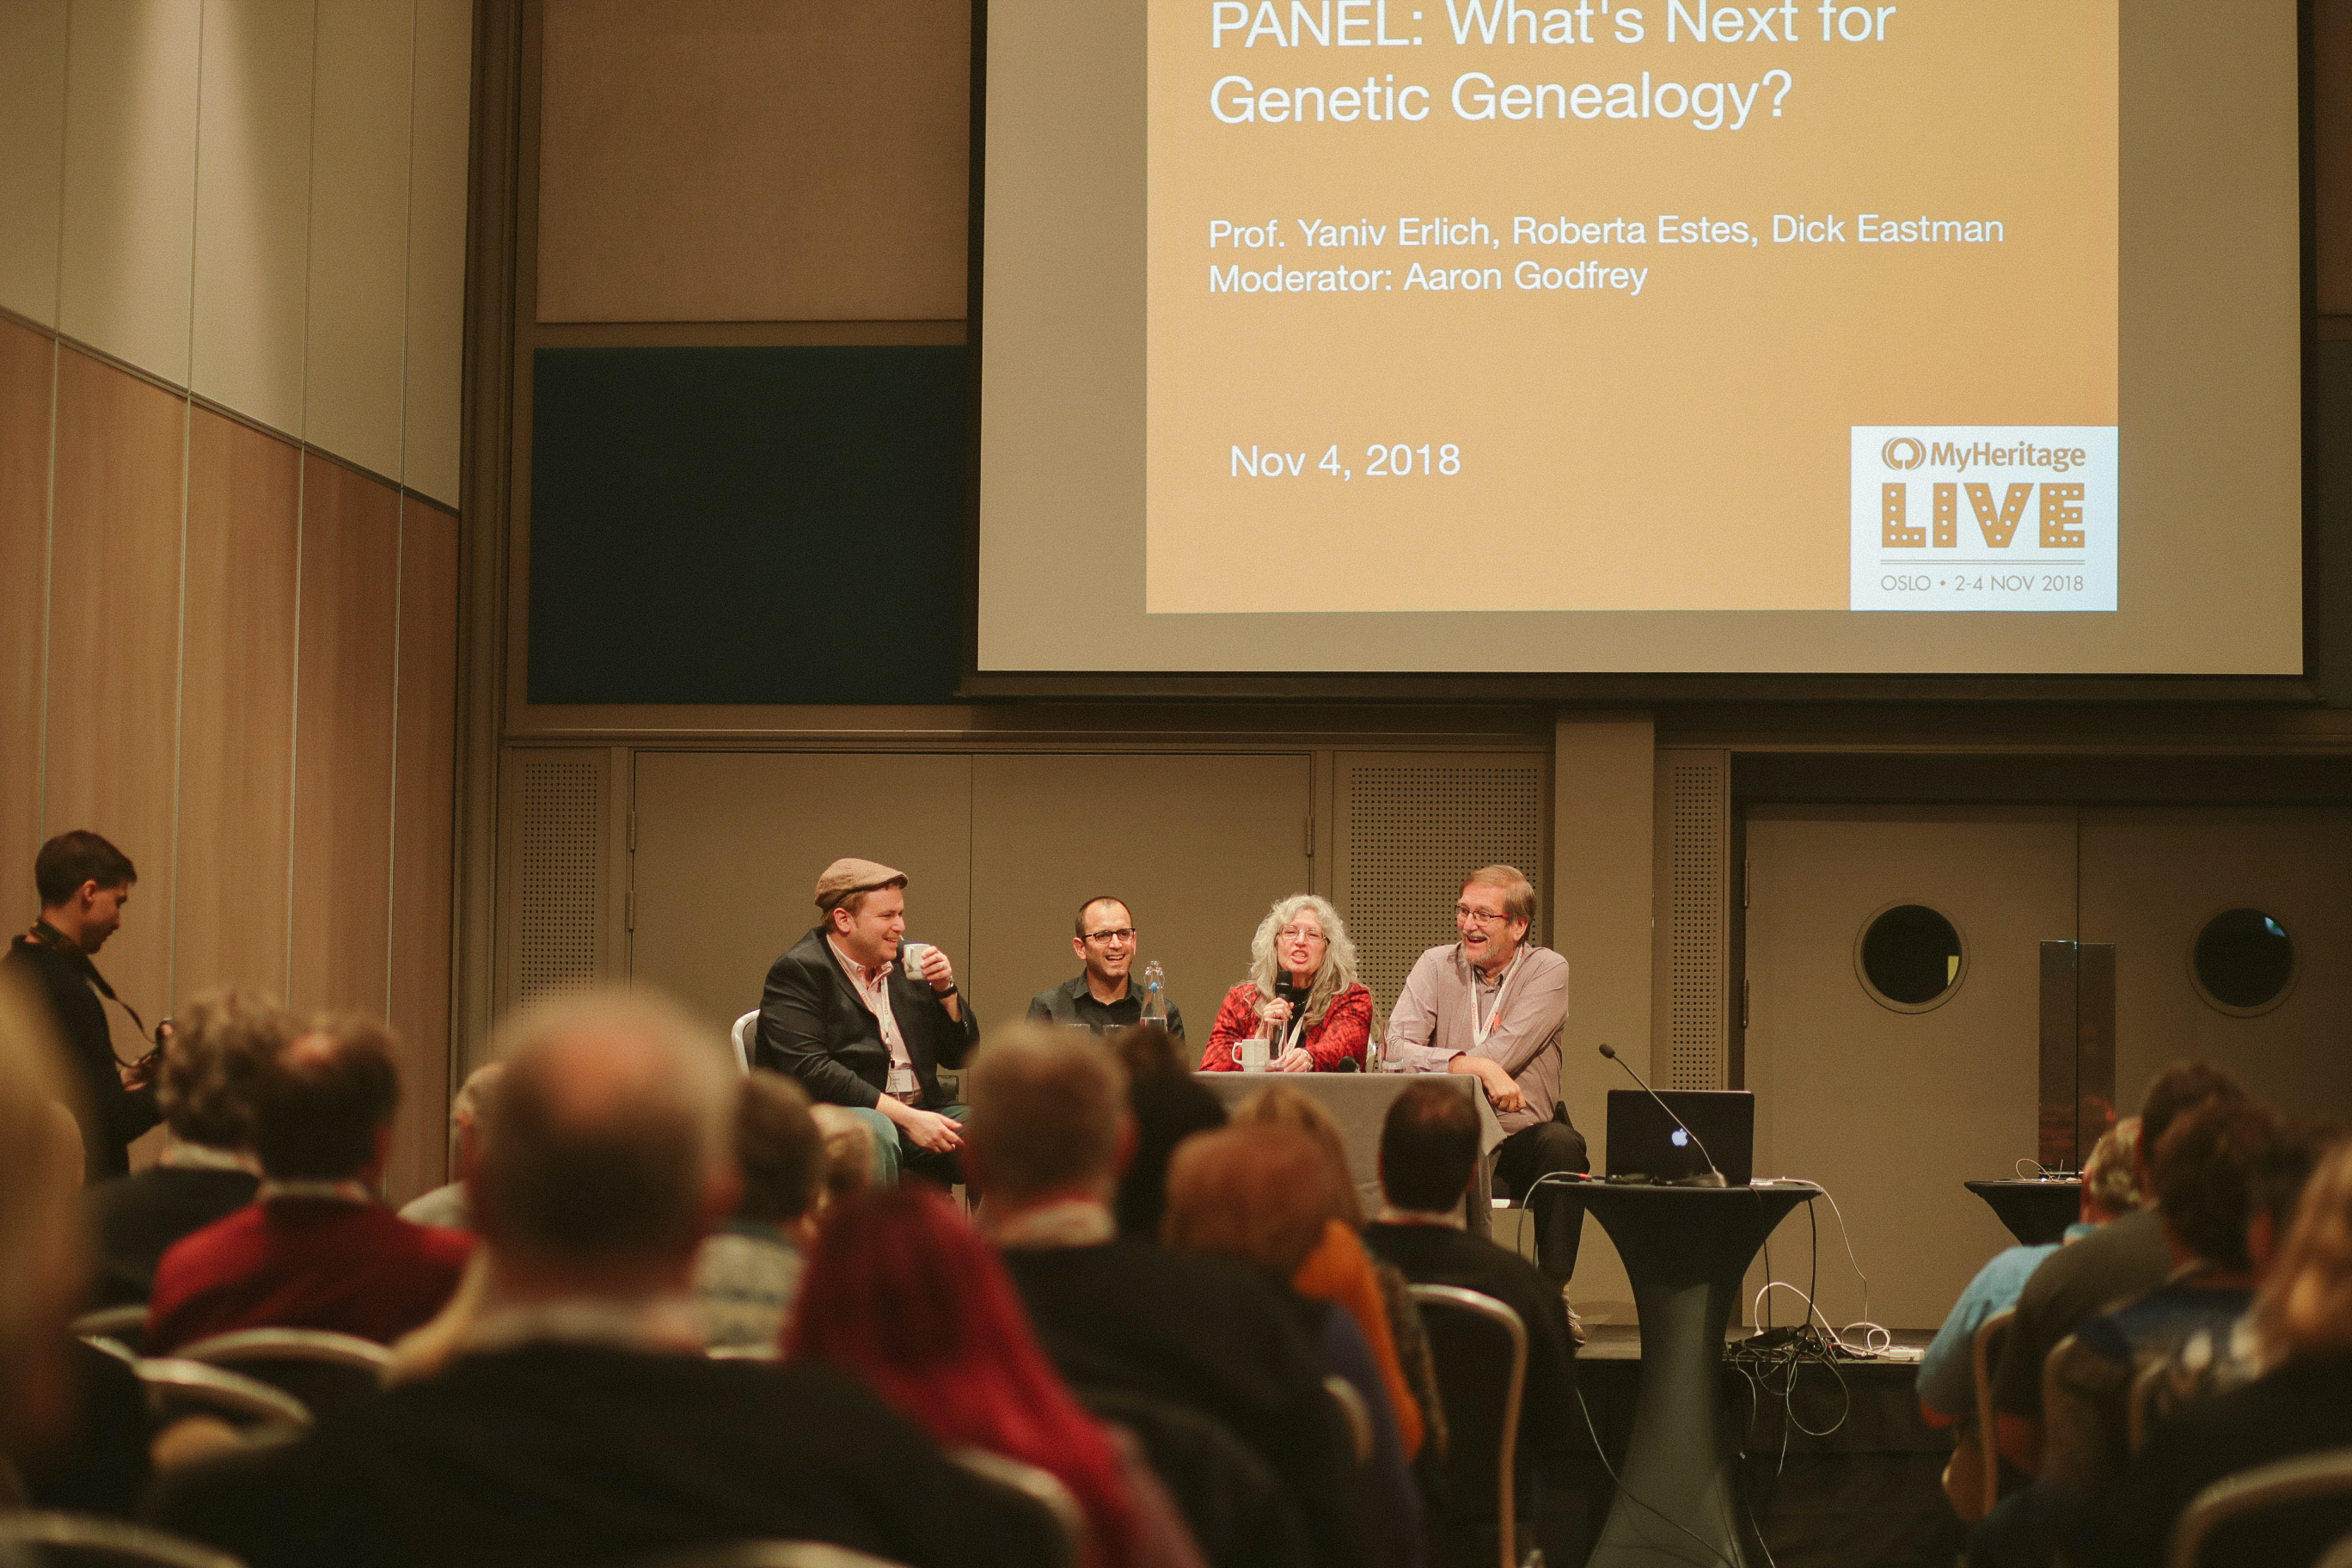 Panel on What’s Next for Genetic Genealogy with Aaron Godfrey, Dr. Yaniv Erlich, Roberta Estes, and Dick Eastman